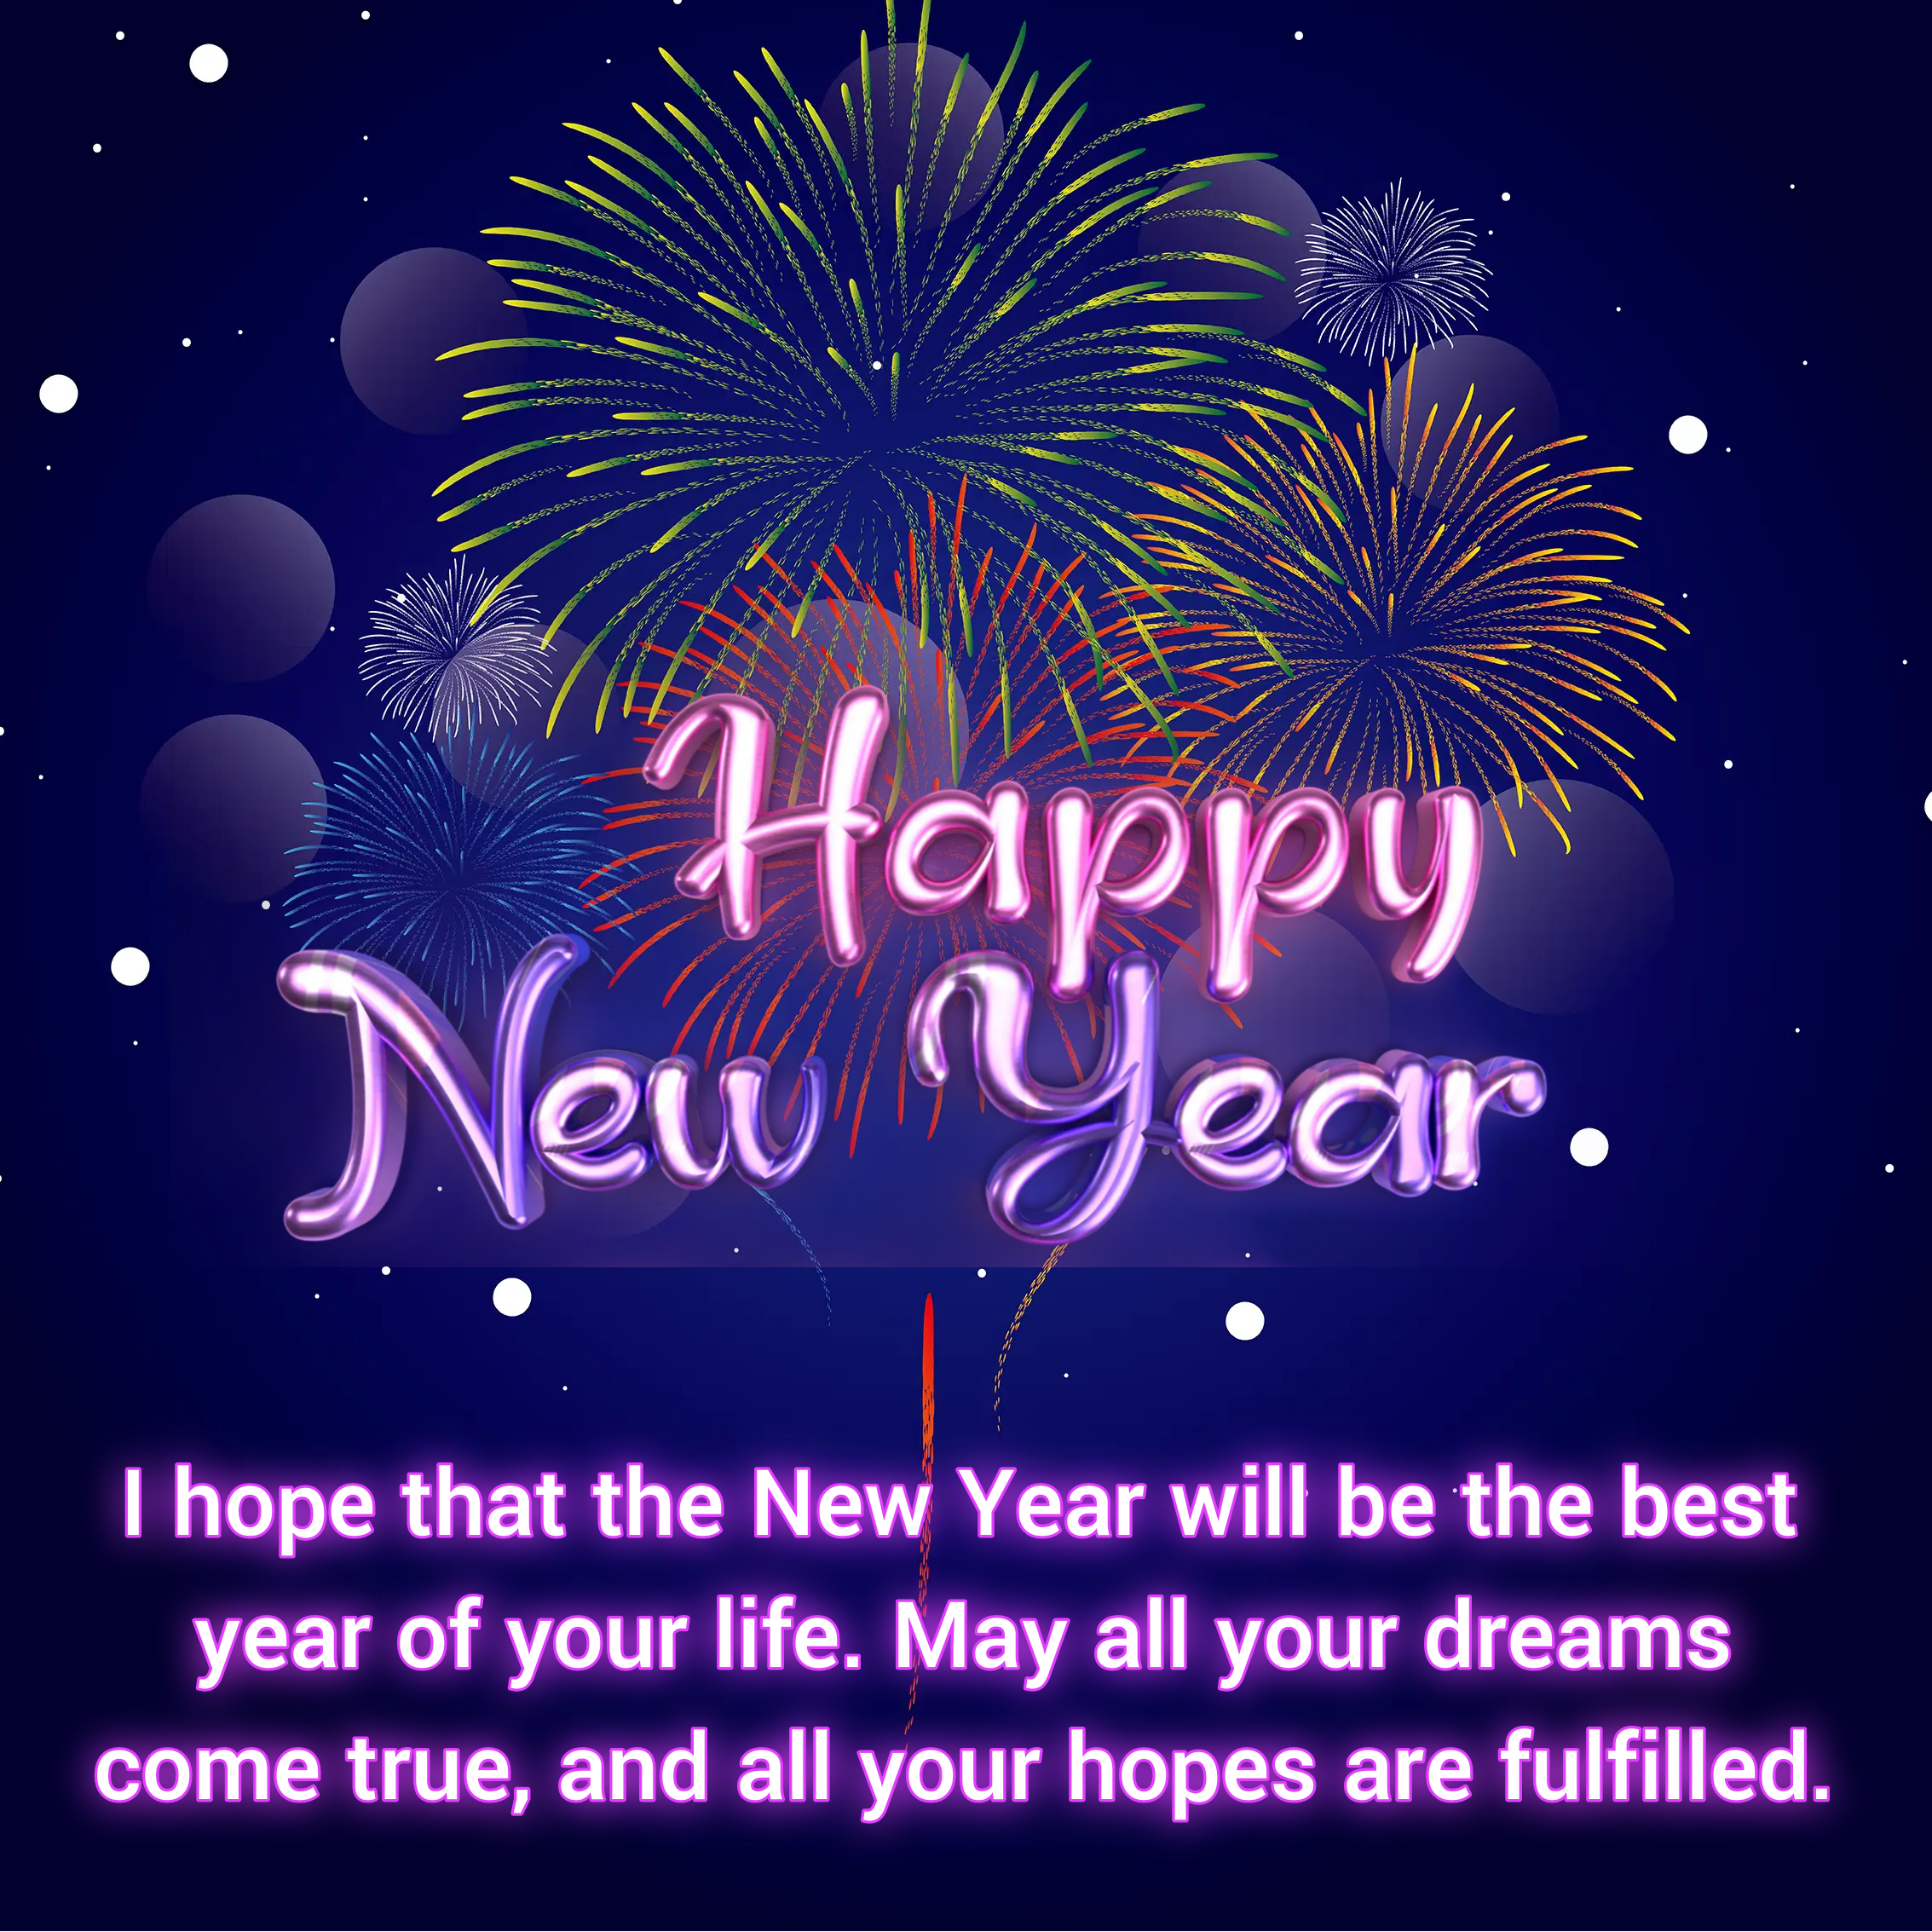 I hope that the New Year will be the best year of your life